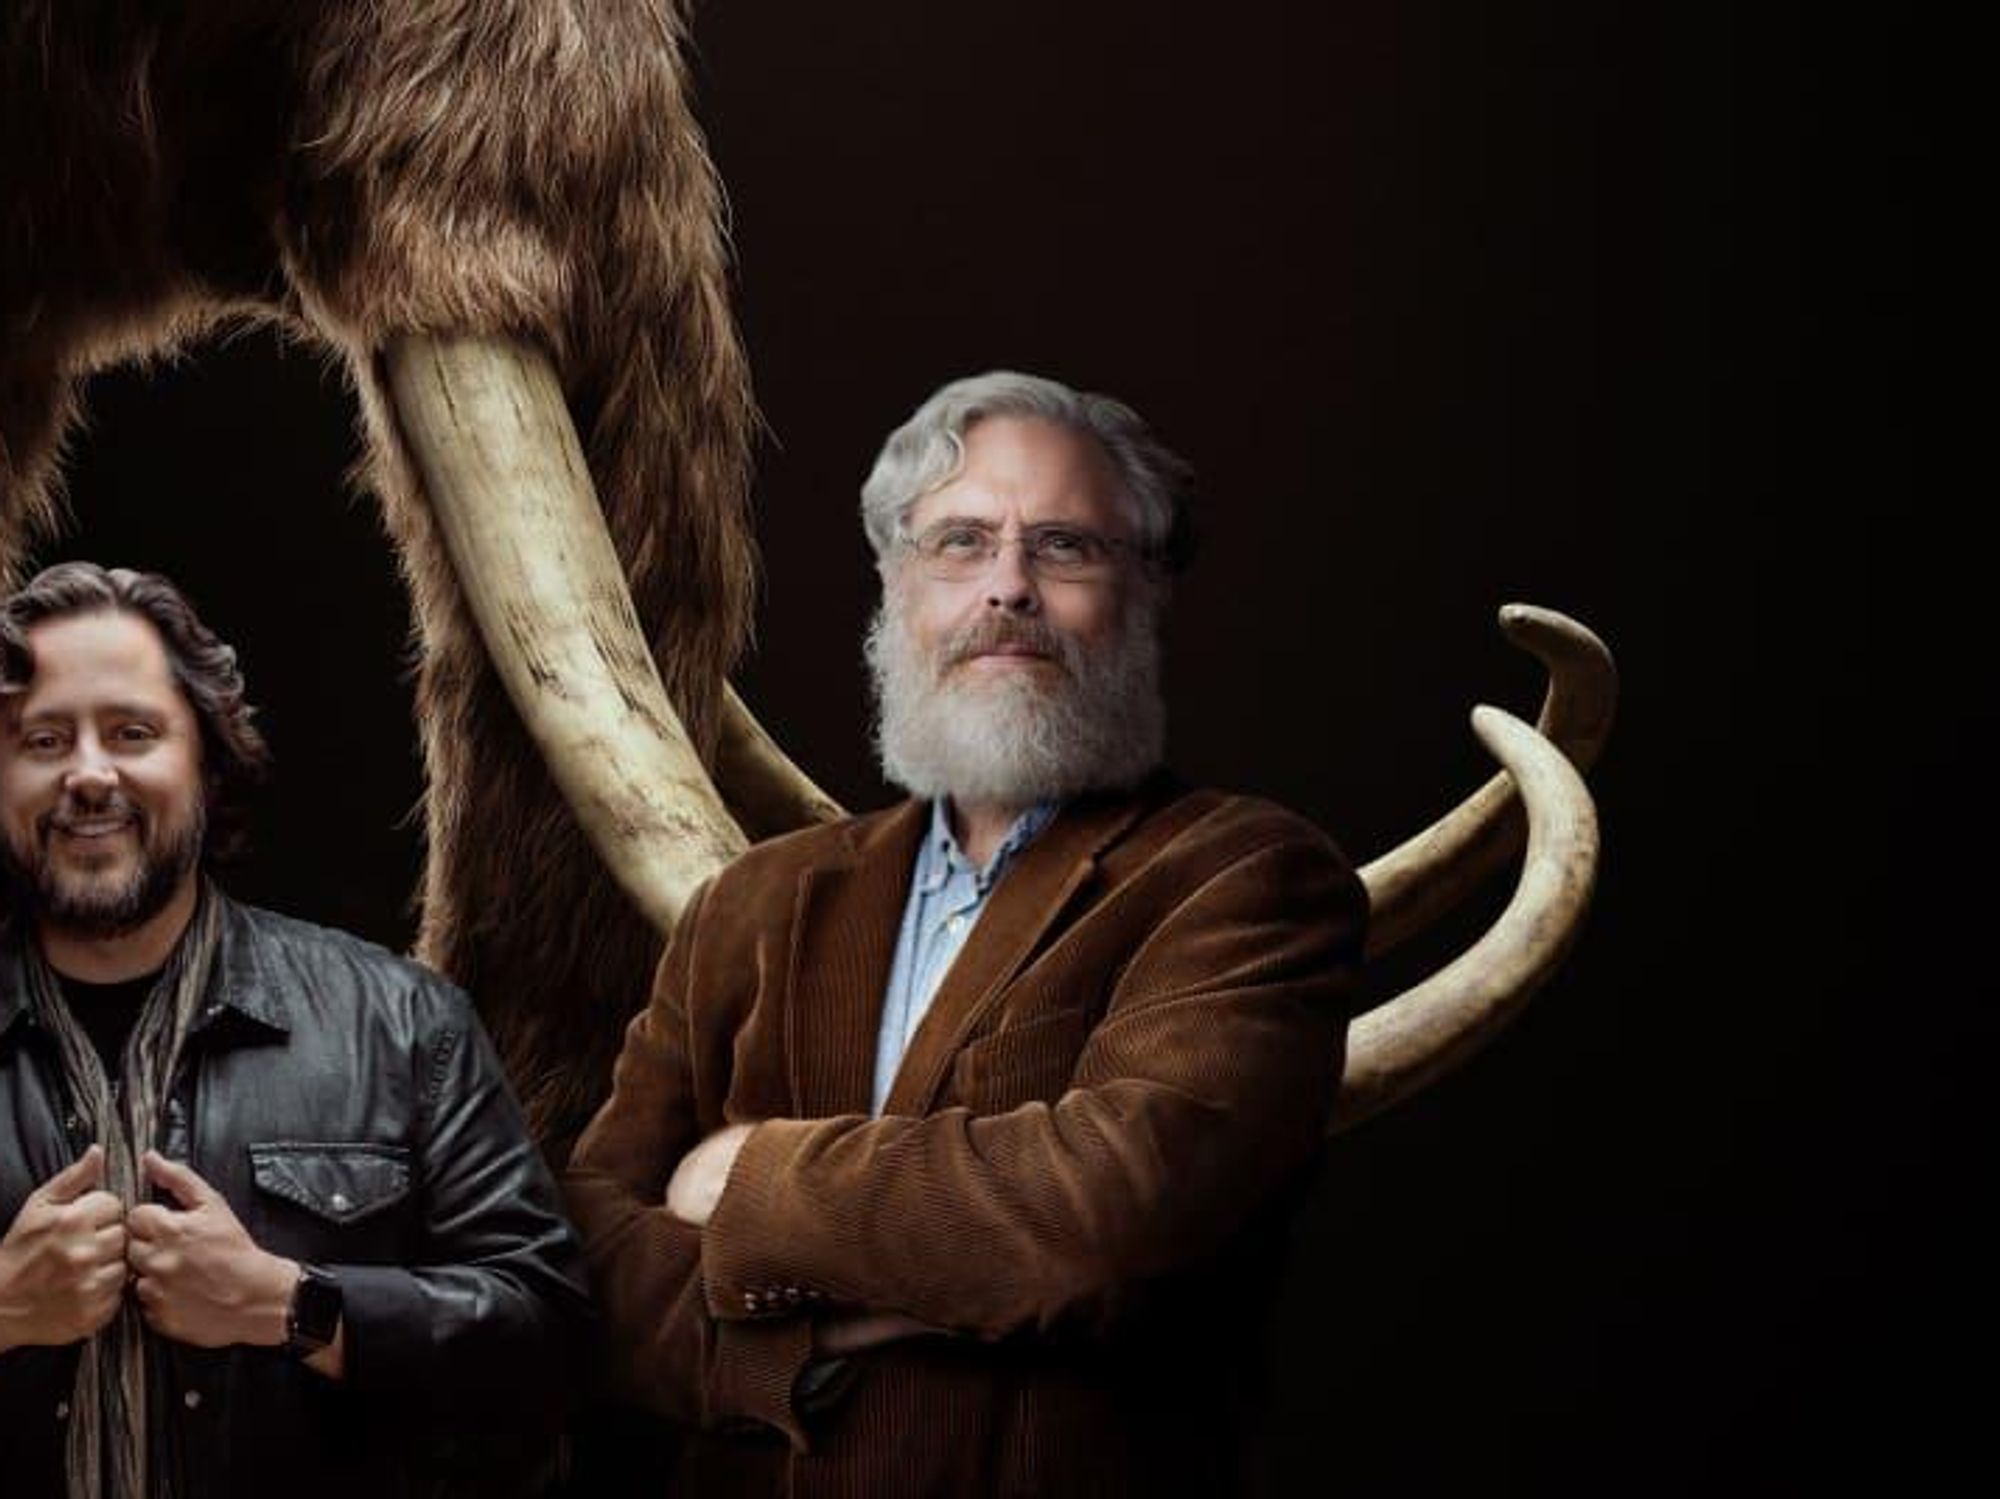 Ben Lamm and George Church of Colossal